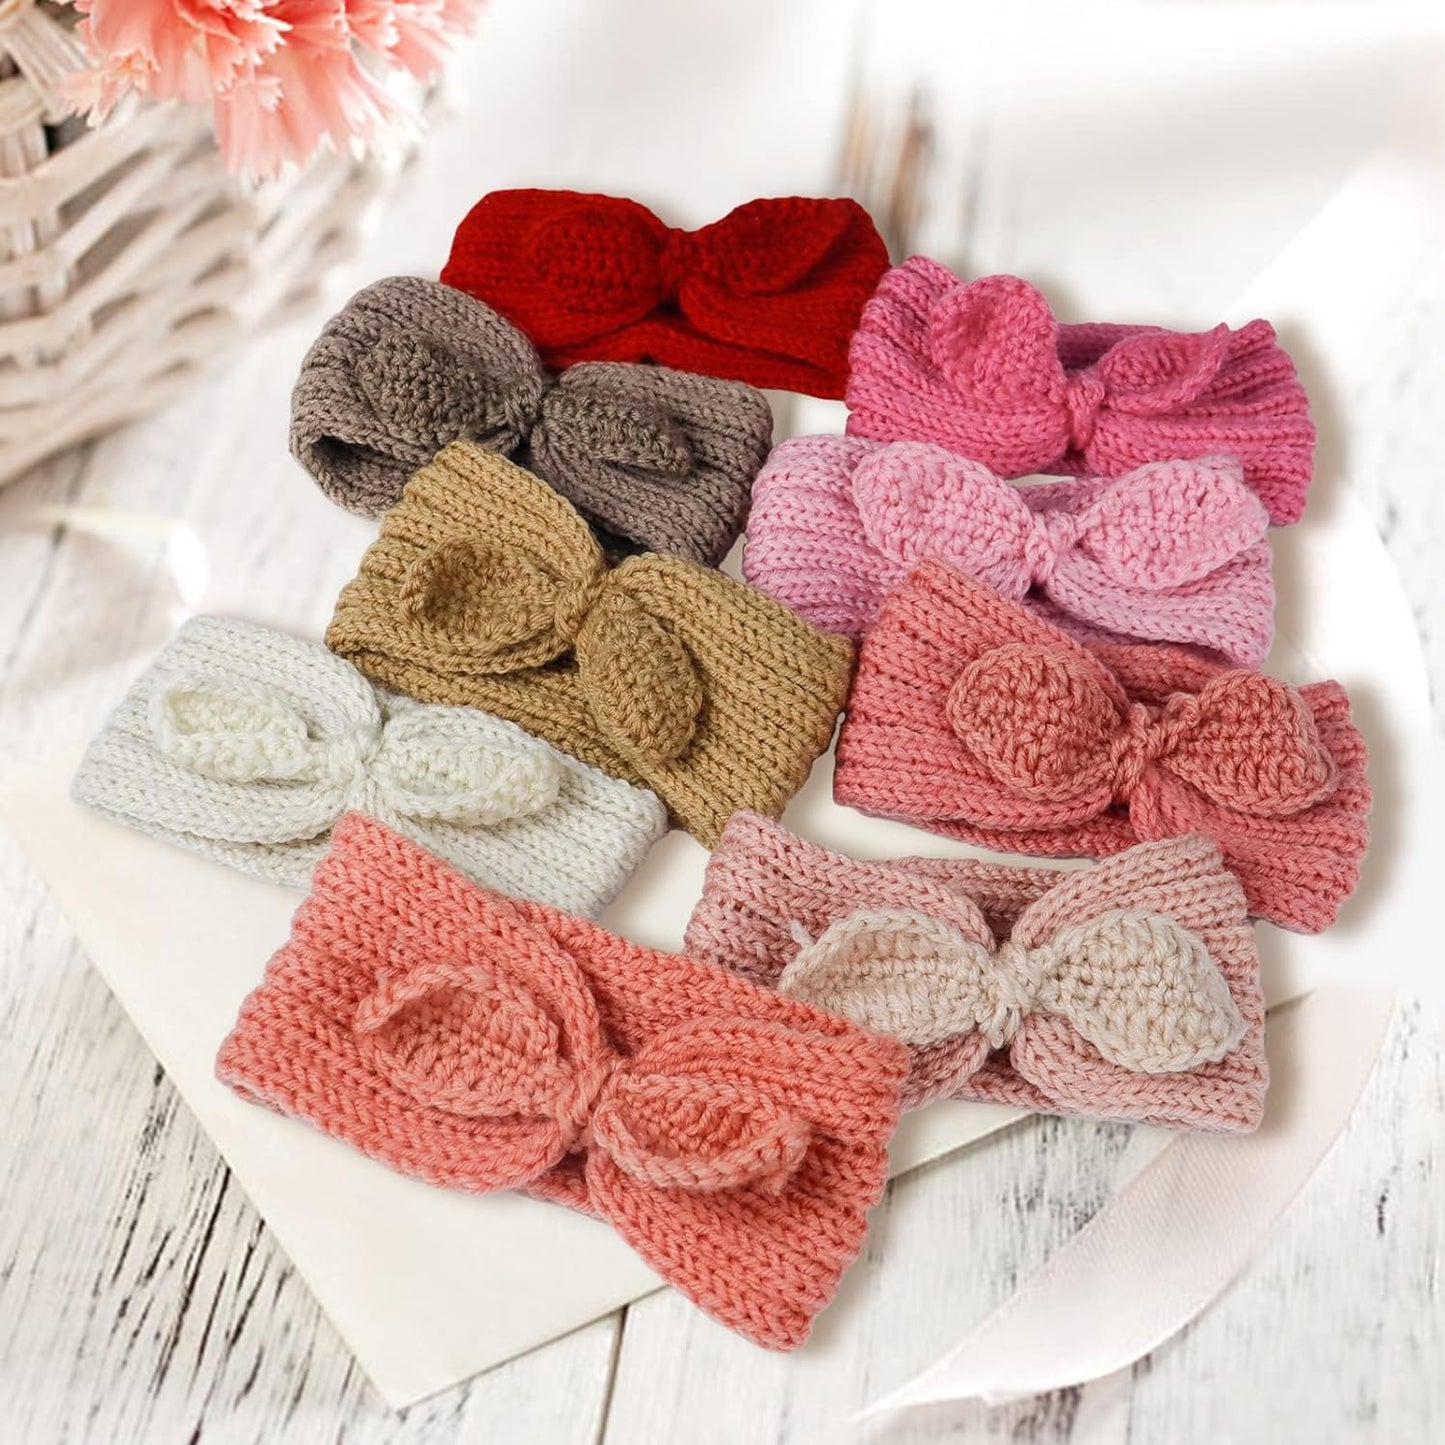 Fmeida 3 Pack Baby Girl Headband, Warm Rabbit Knot Hair Band, Knit Head Wrap Elastics Hairbands, Hair Accessories for Newborn Infant Toddlers Kids Children | White+Camel+Coffee